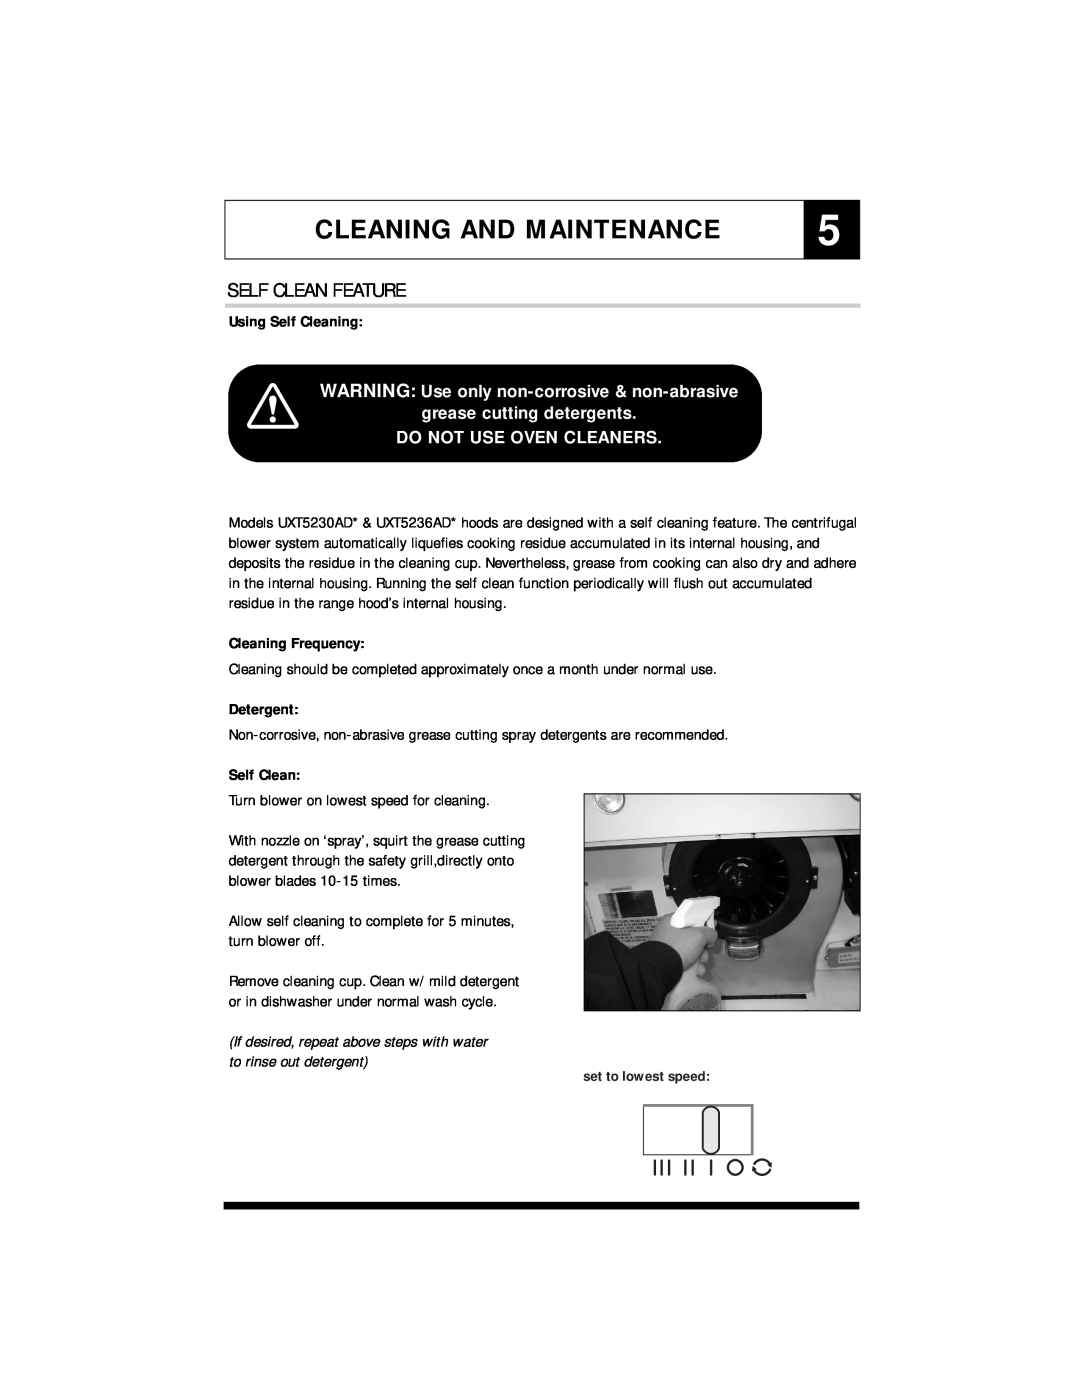 Maytag UXT5236AD Cleaning And Maintenance, Self Clean Feature, Using Self Cleaning, grease cutting detergents, Detergent 